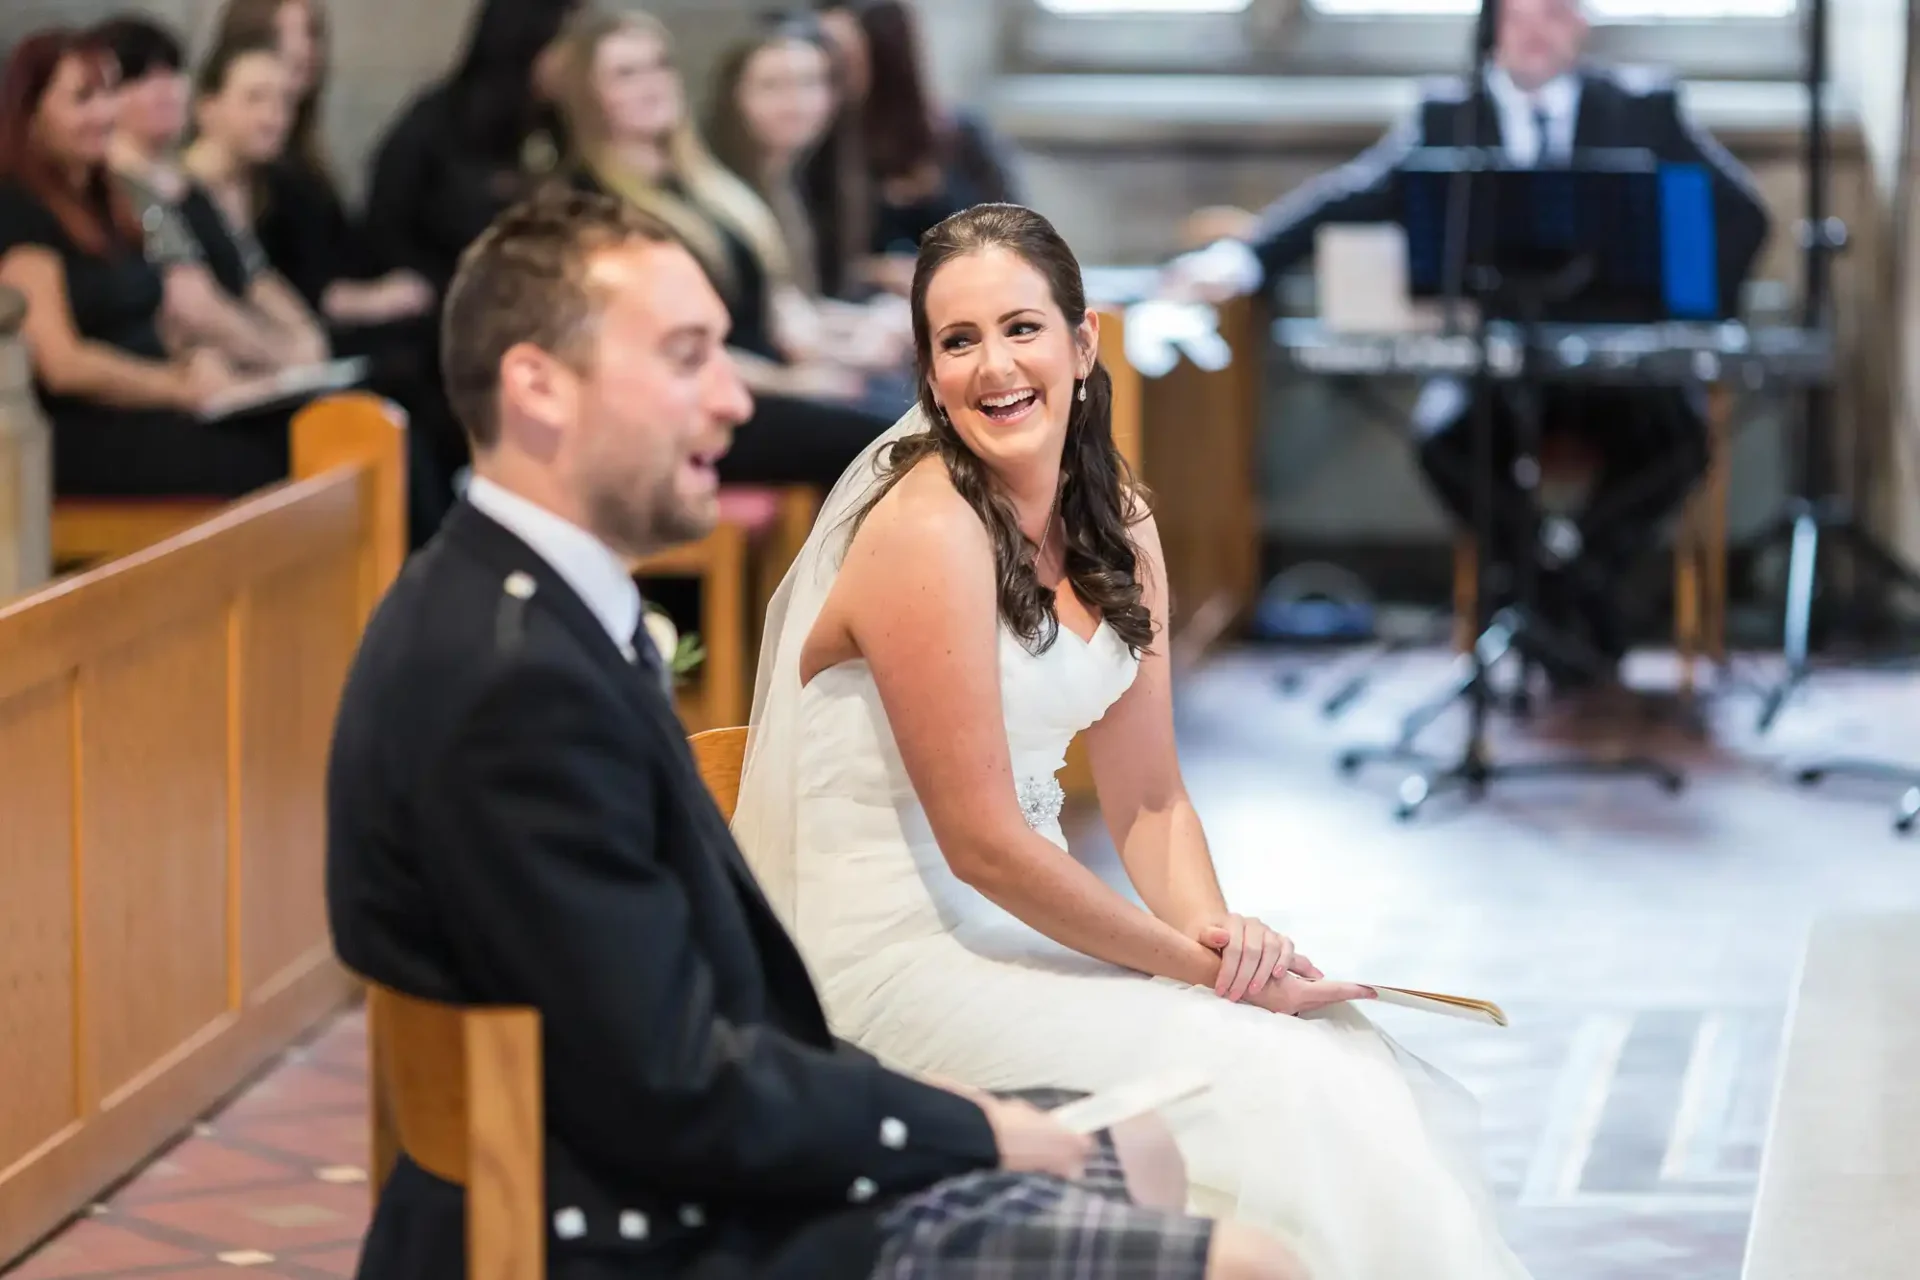 A bride and groom laughing joyfully in a church, seated during their wedding ceremony, with guests looking on.